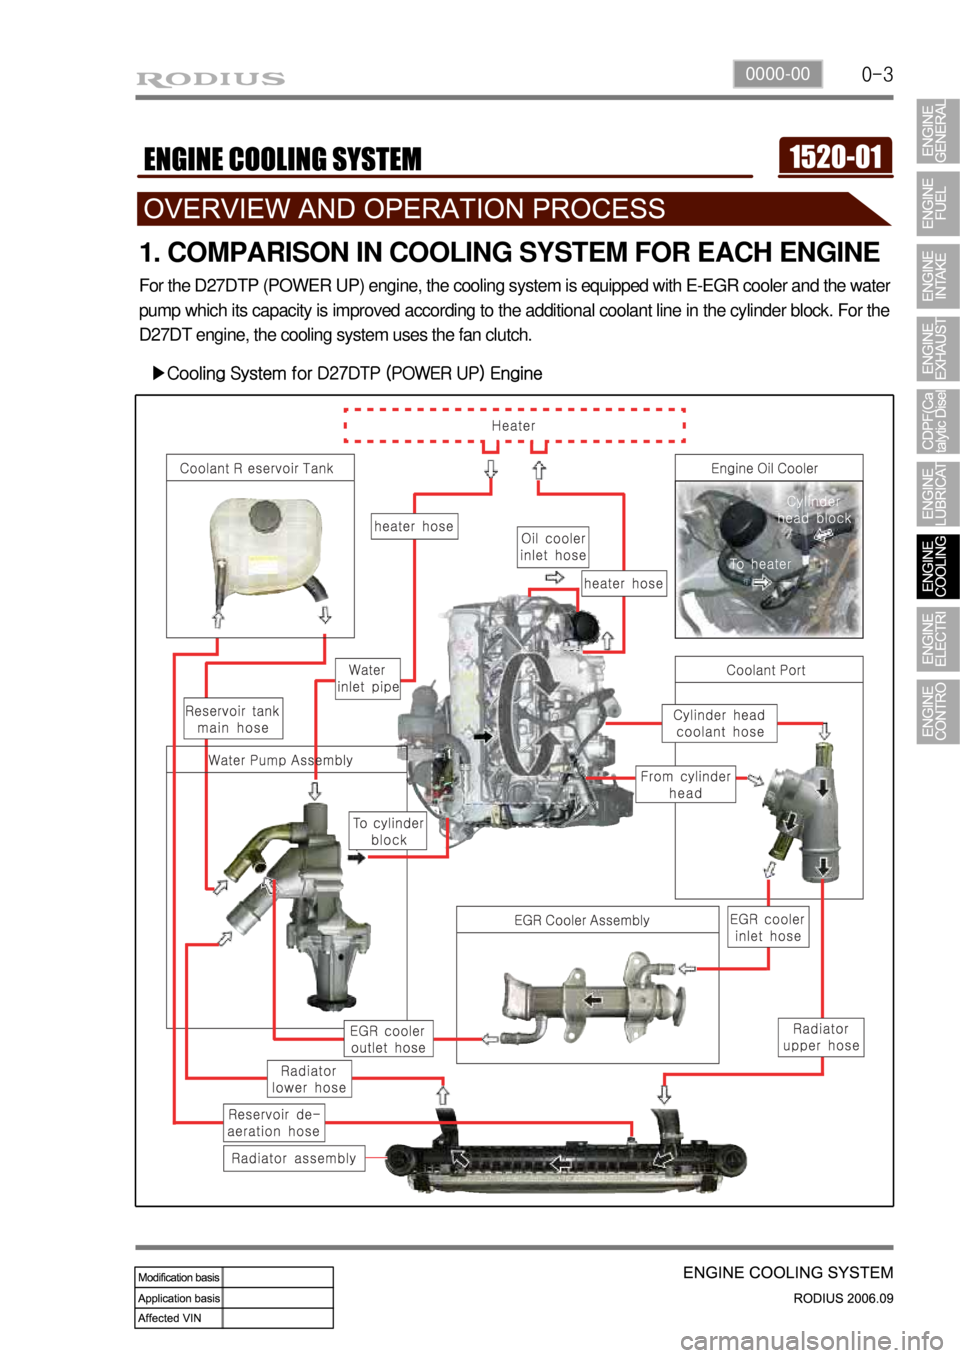 SSANGYONG RODIUS 2007  Service Manual 0-30000-00
1. COMPARISON IN COOLING SYSTEM FOR EACH ENGINE
For the D27DTP (POWER UP) engine, the cooling system is equipped with E-EGR cooler and the water  
pump which its capacity is improved accord